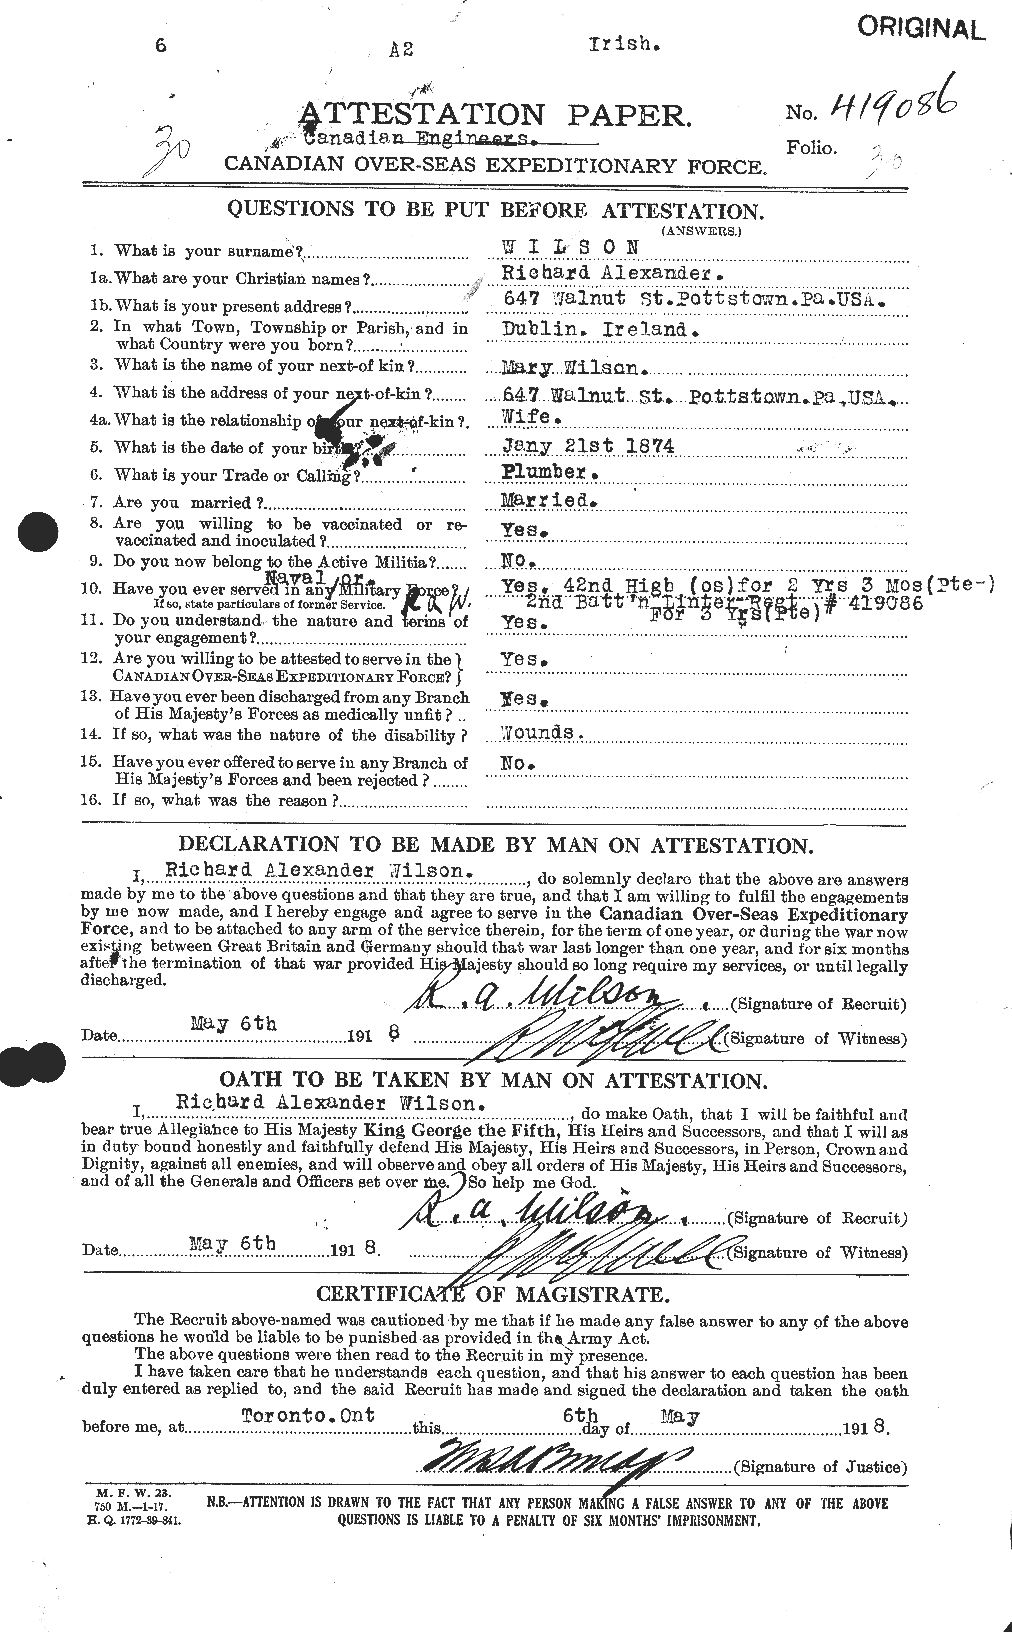 Personnel Records of the First World War - CEF 678845a